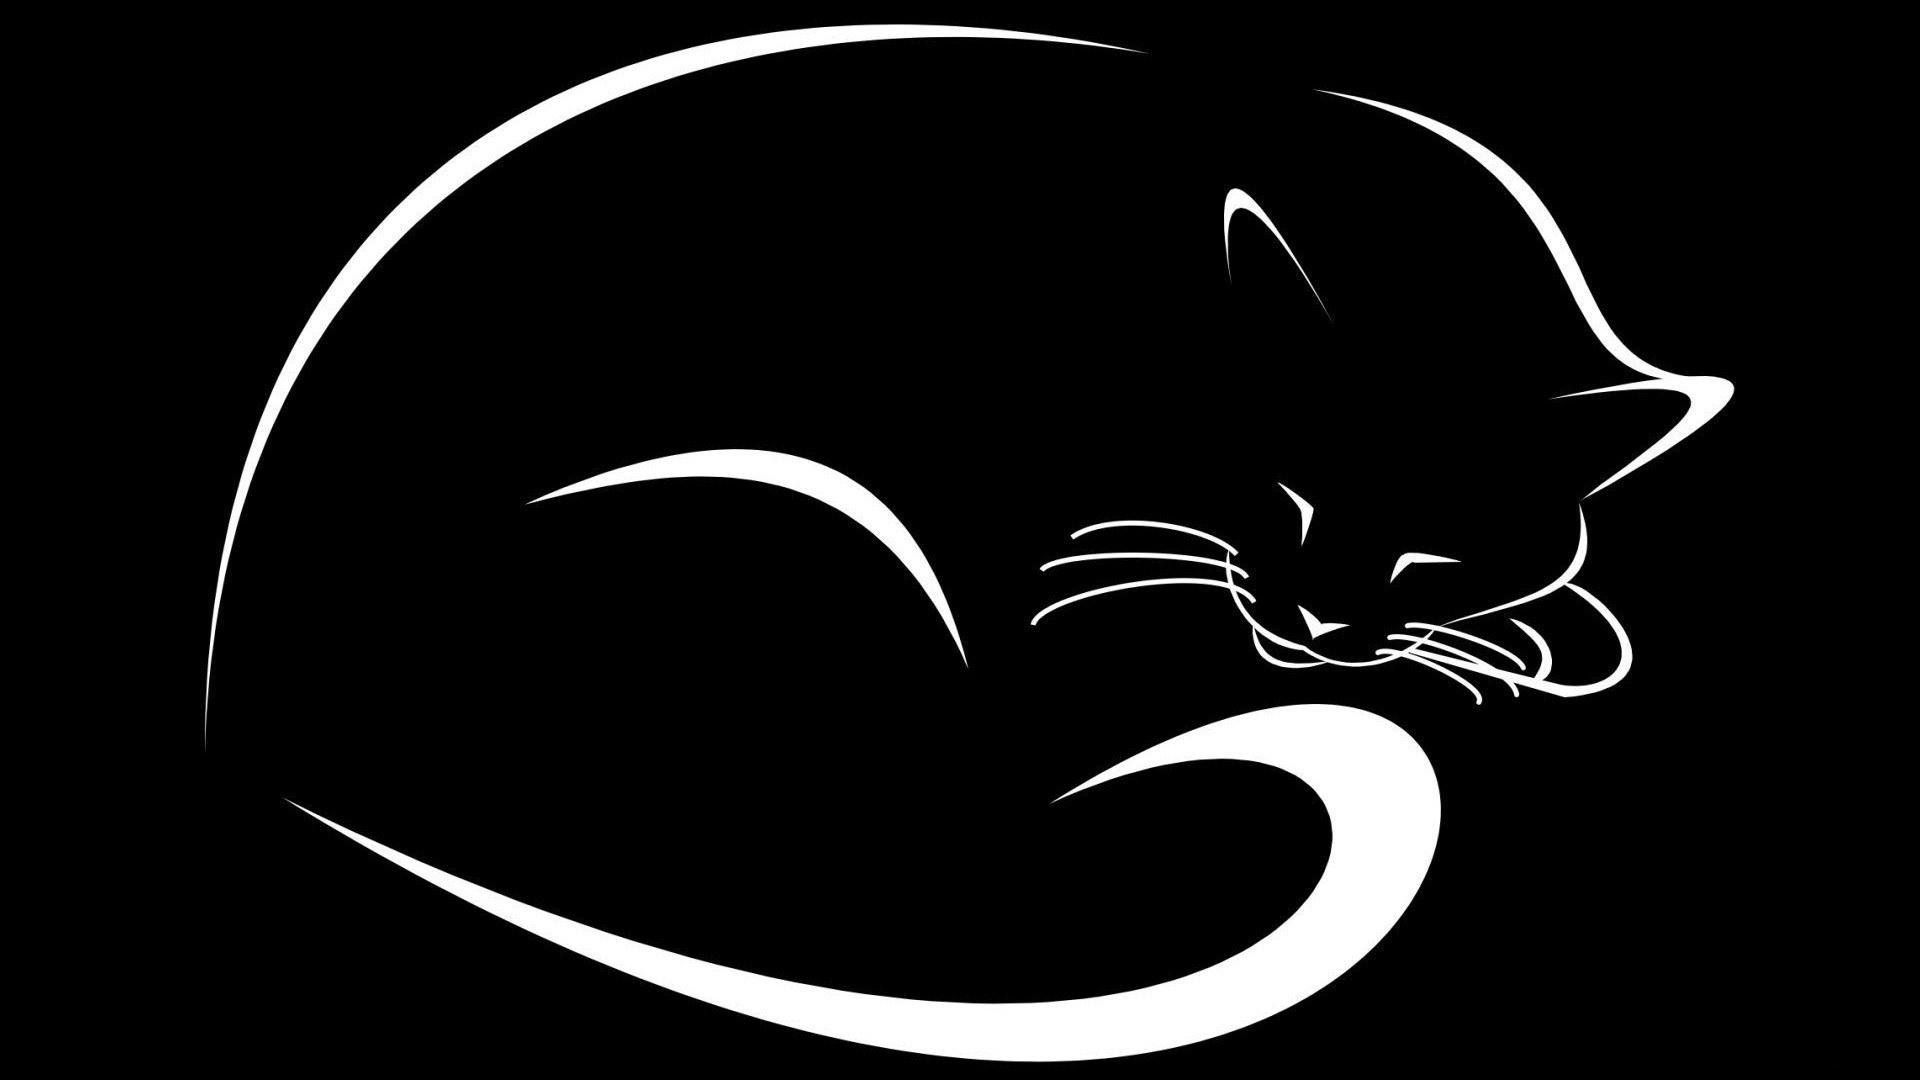 Black White Abstract Cat Wallpapers HD 12333 Full HD Wallpaper